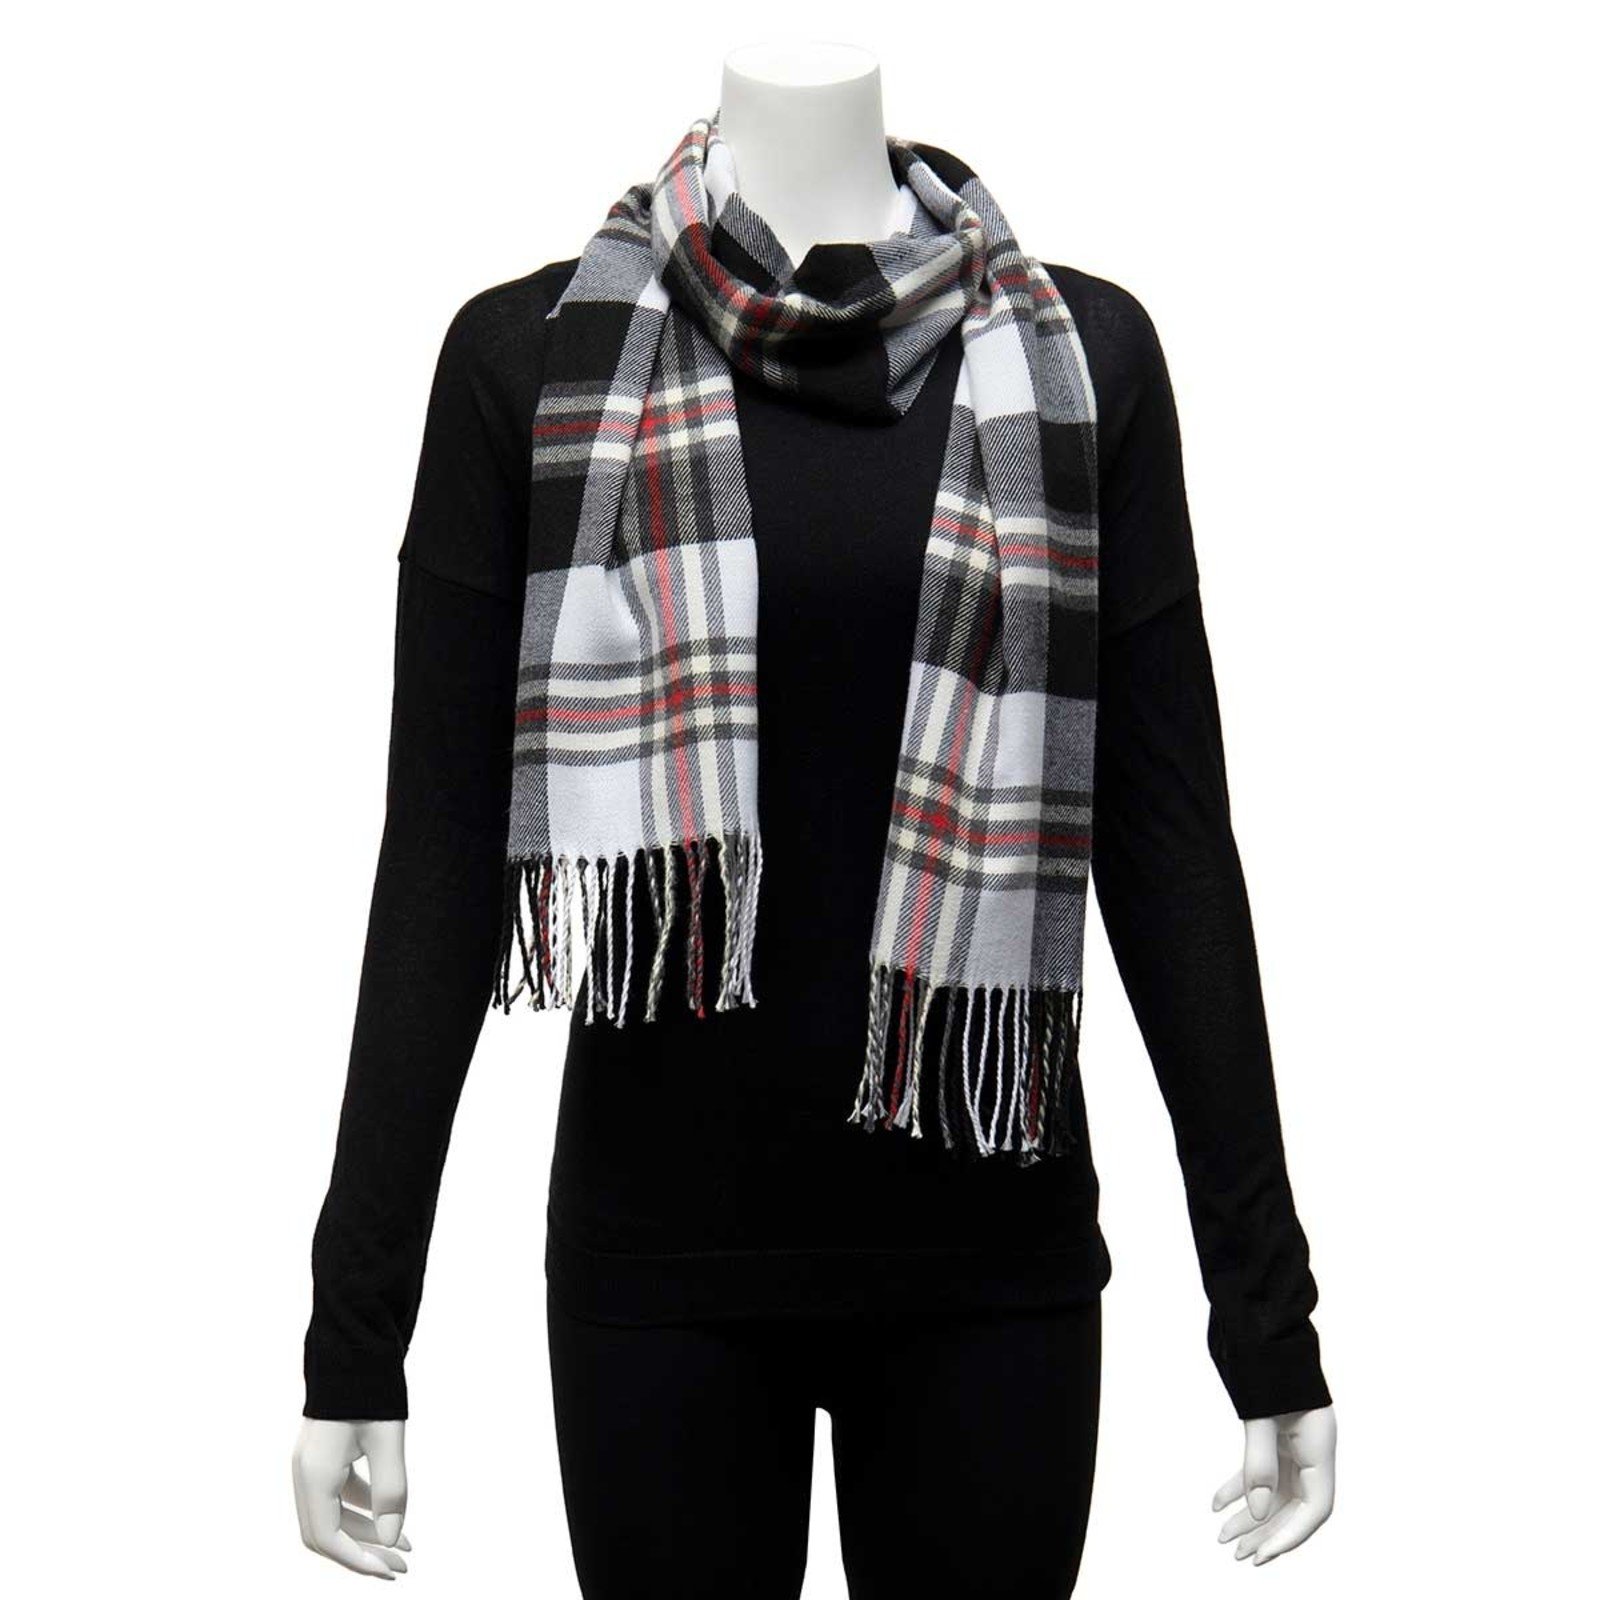 Meravic Grey, Red and Black Plaid Scarf  S6000 loading=